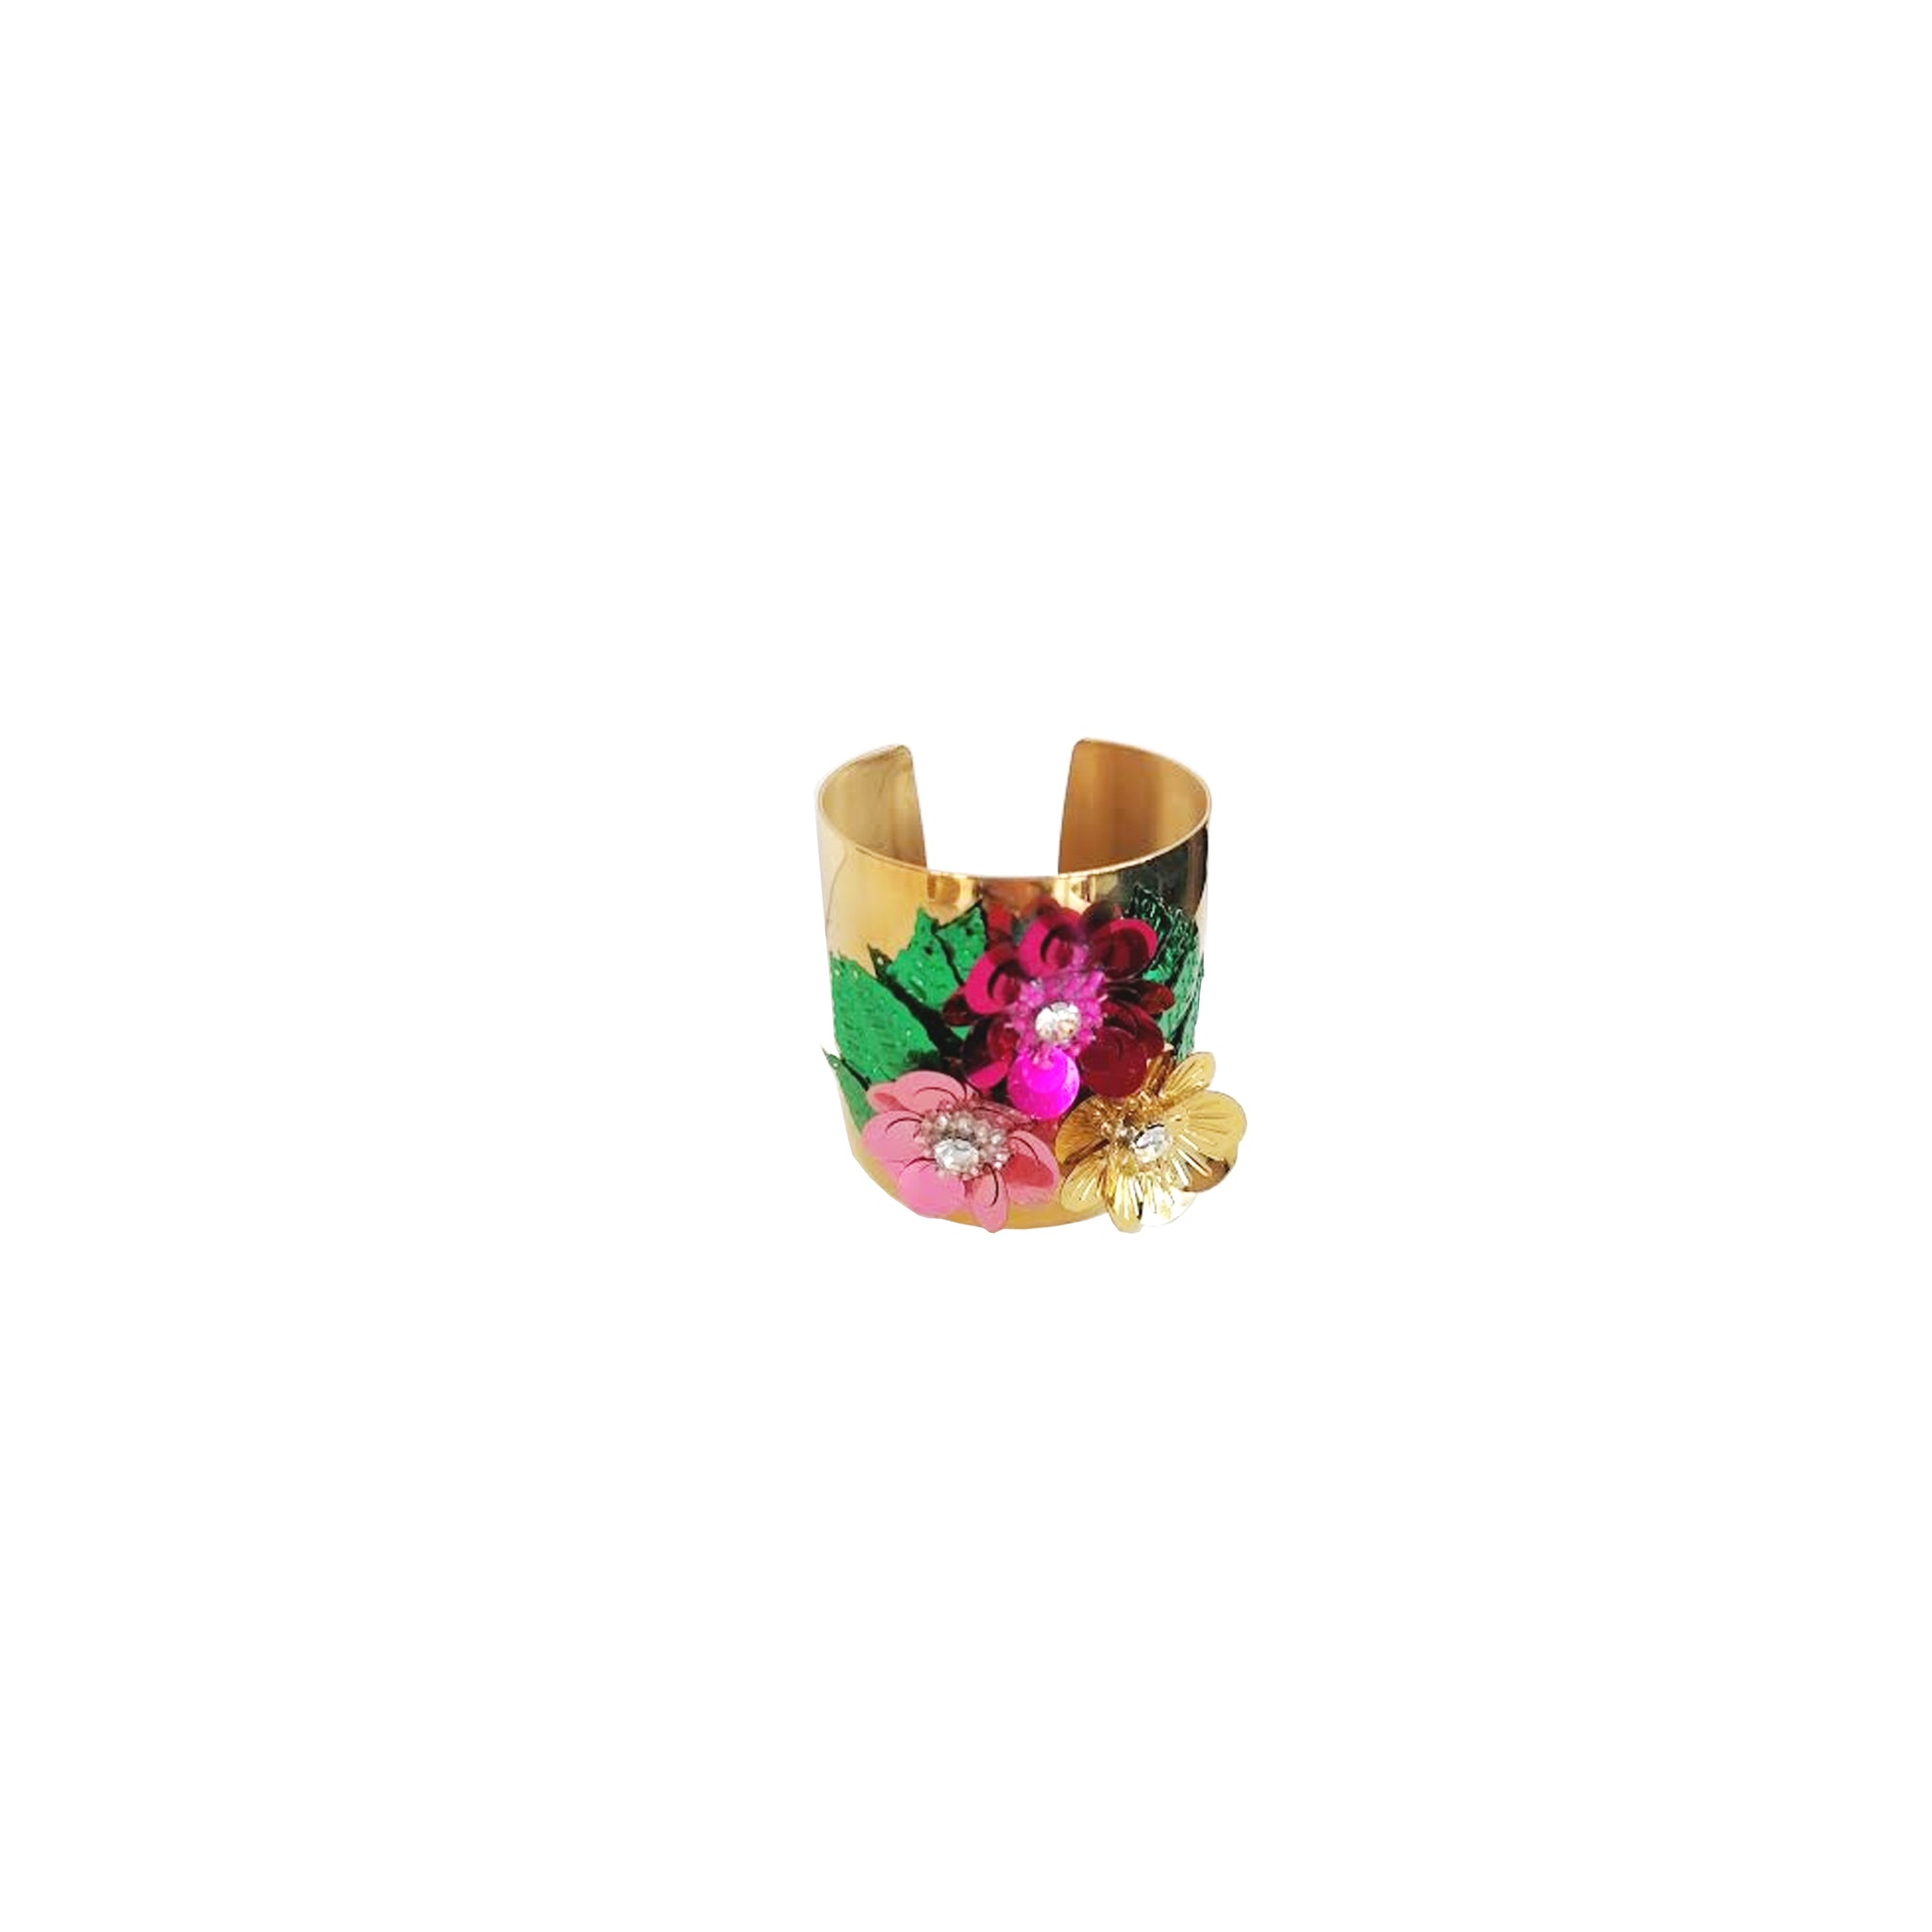 Gold cuff with flowers and palms leave